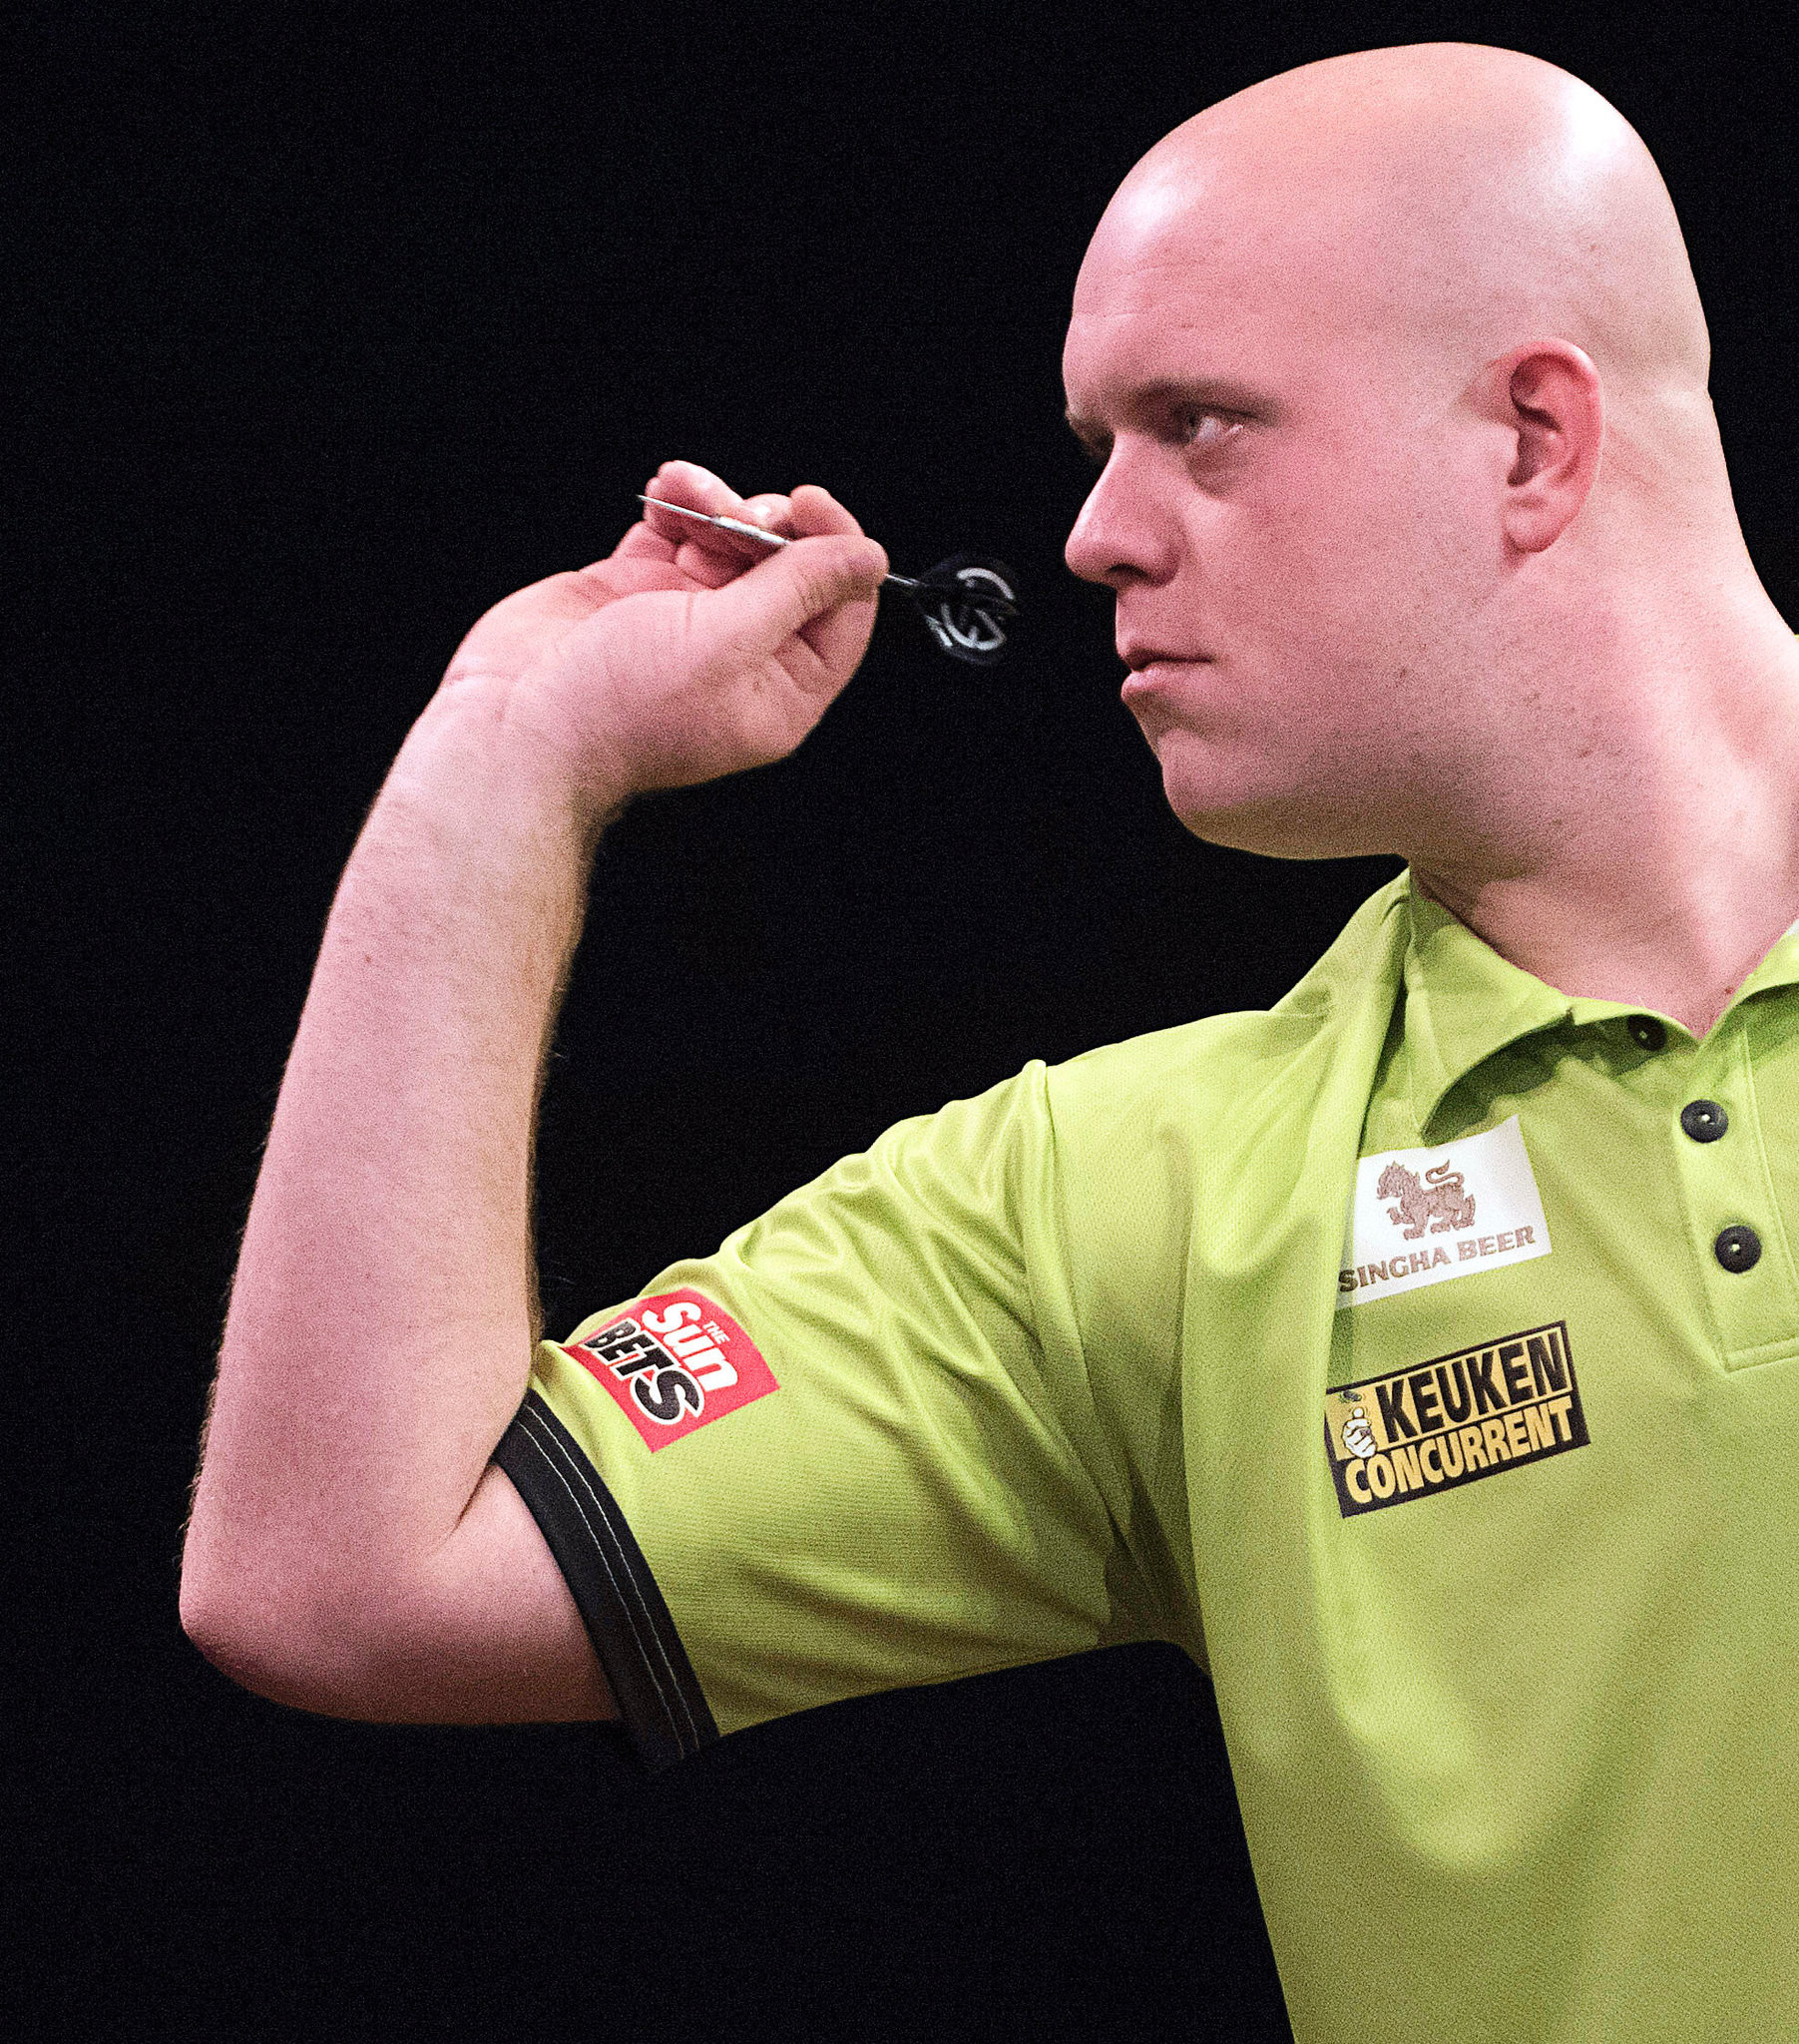 Van Gerwen aiming for record fifth PDC European Championship title